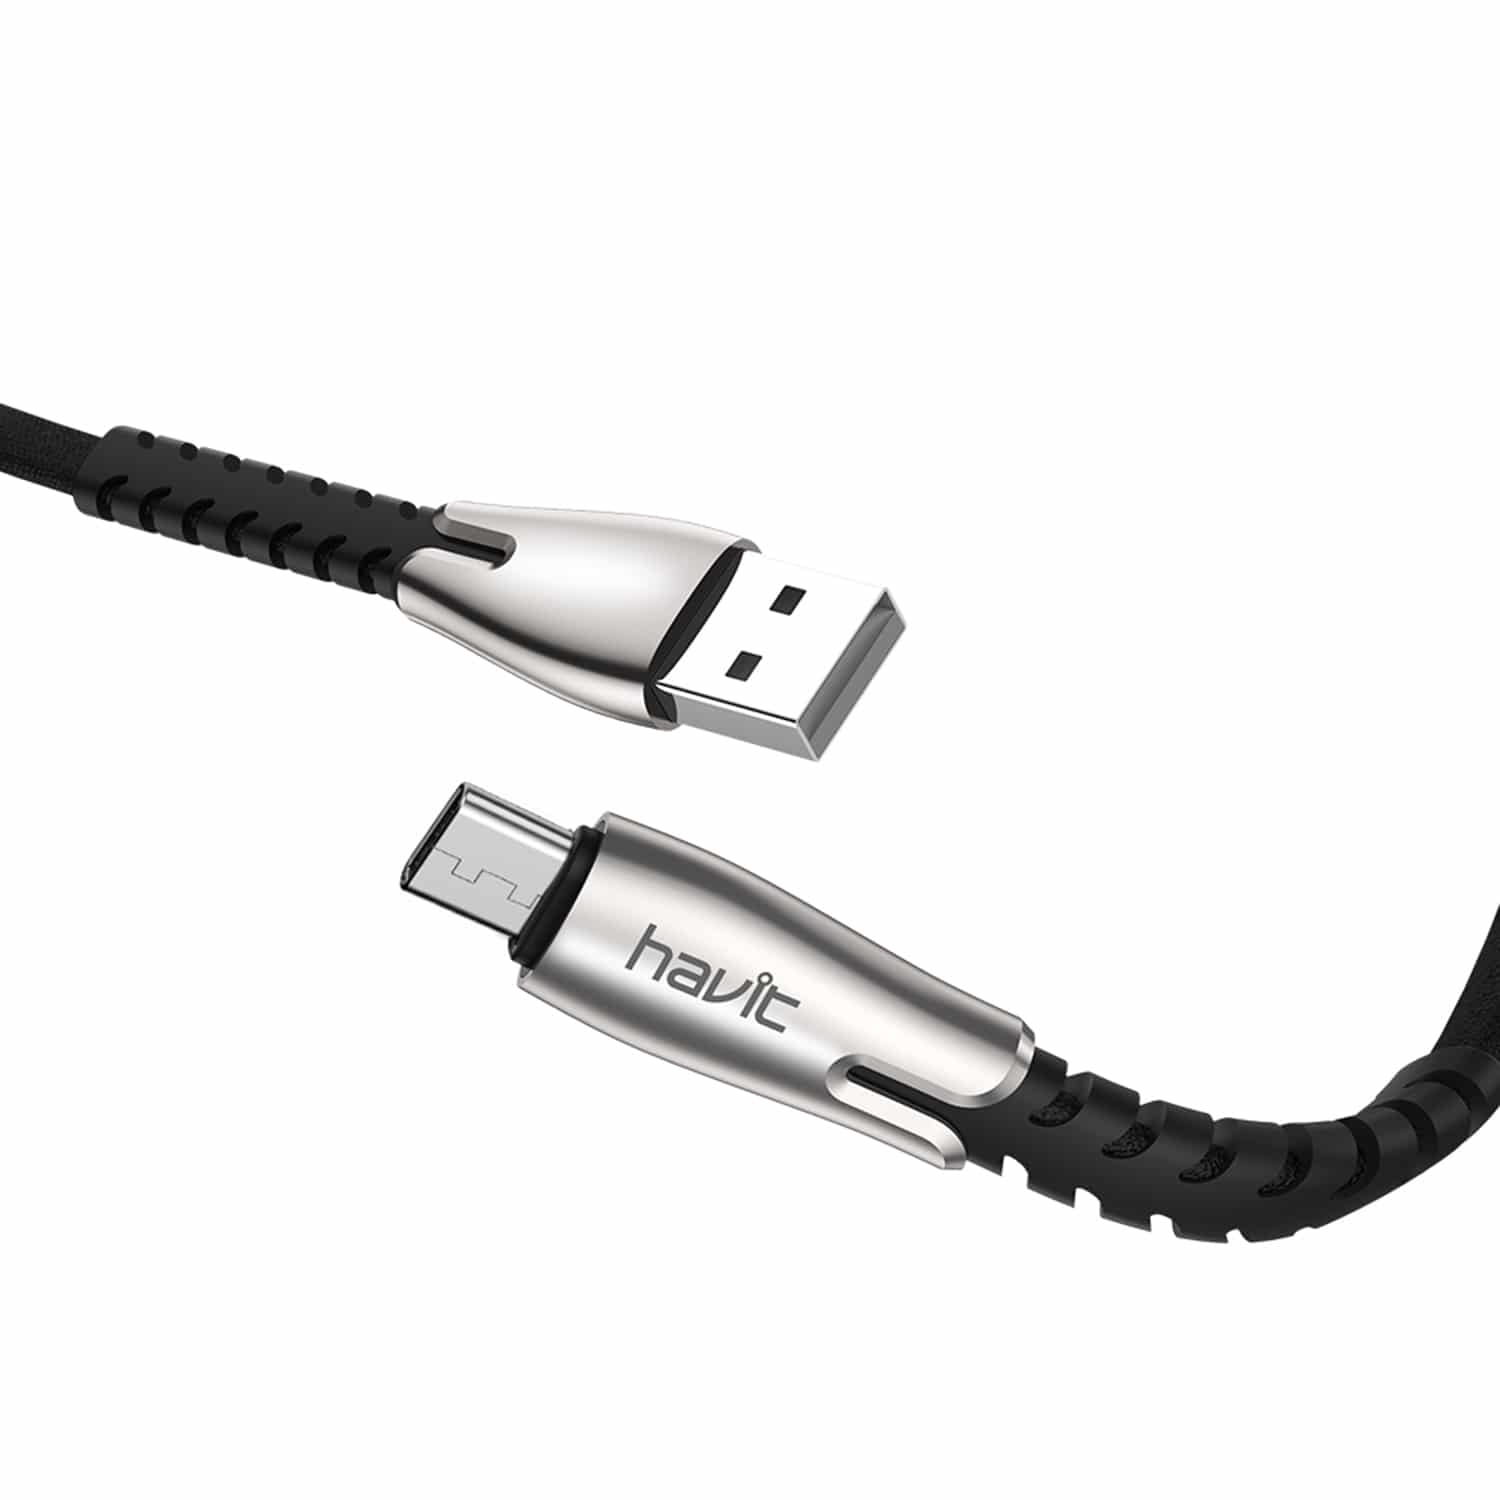 HAVIT HV-H6112 USB 2.0 A-Male to Micro B Charger Cable, Fast Charging, Silver